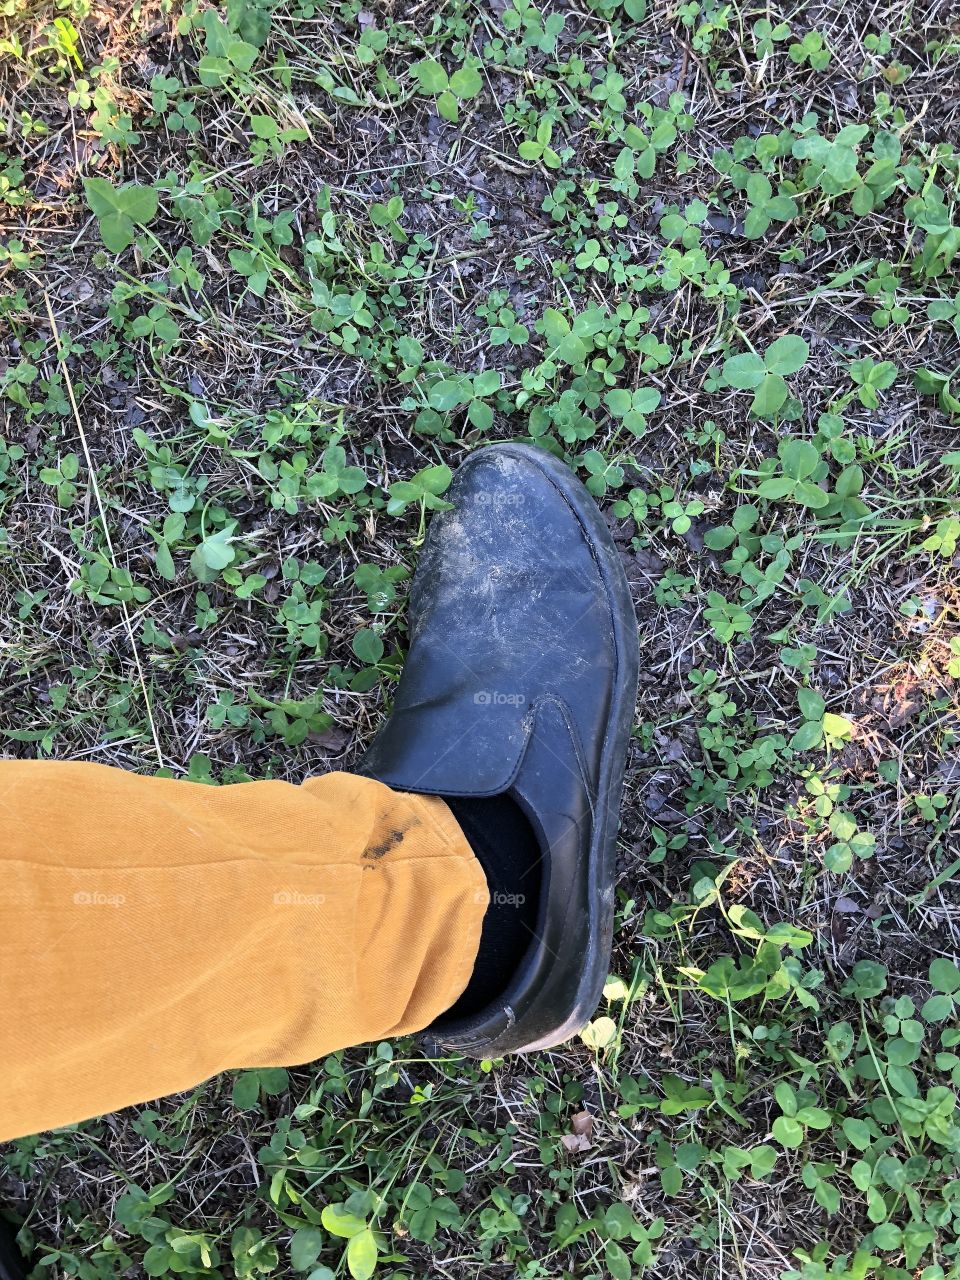 Dirty shoes on the grass